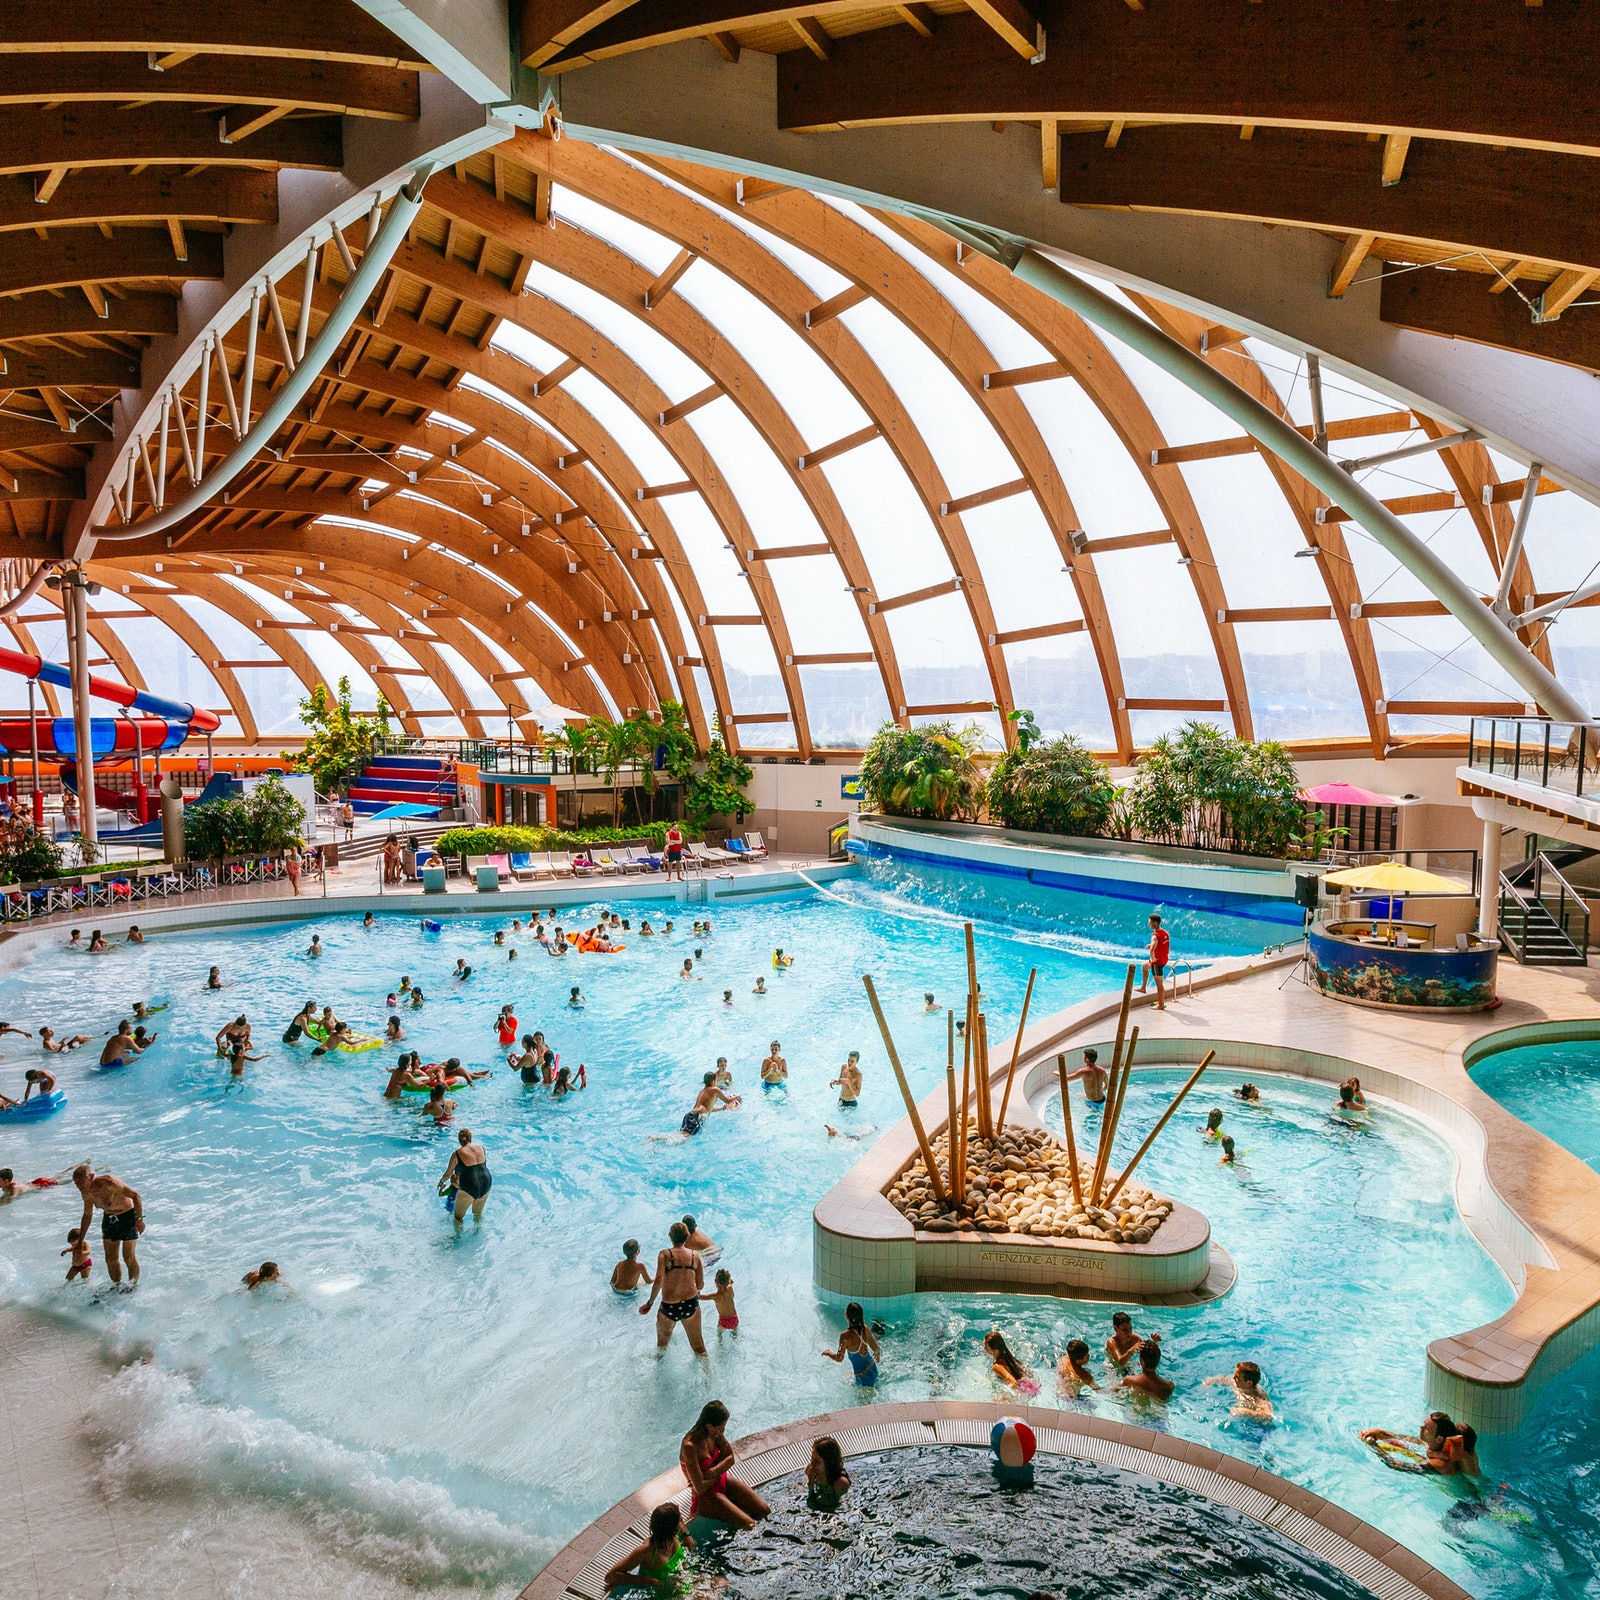 Acquaworld: indoor and outdoor water park in Italy